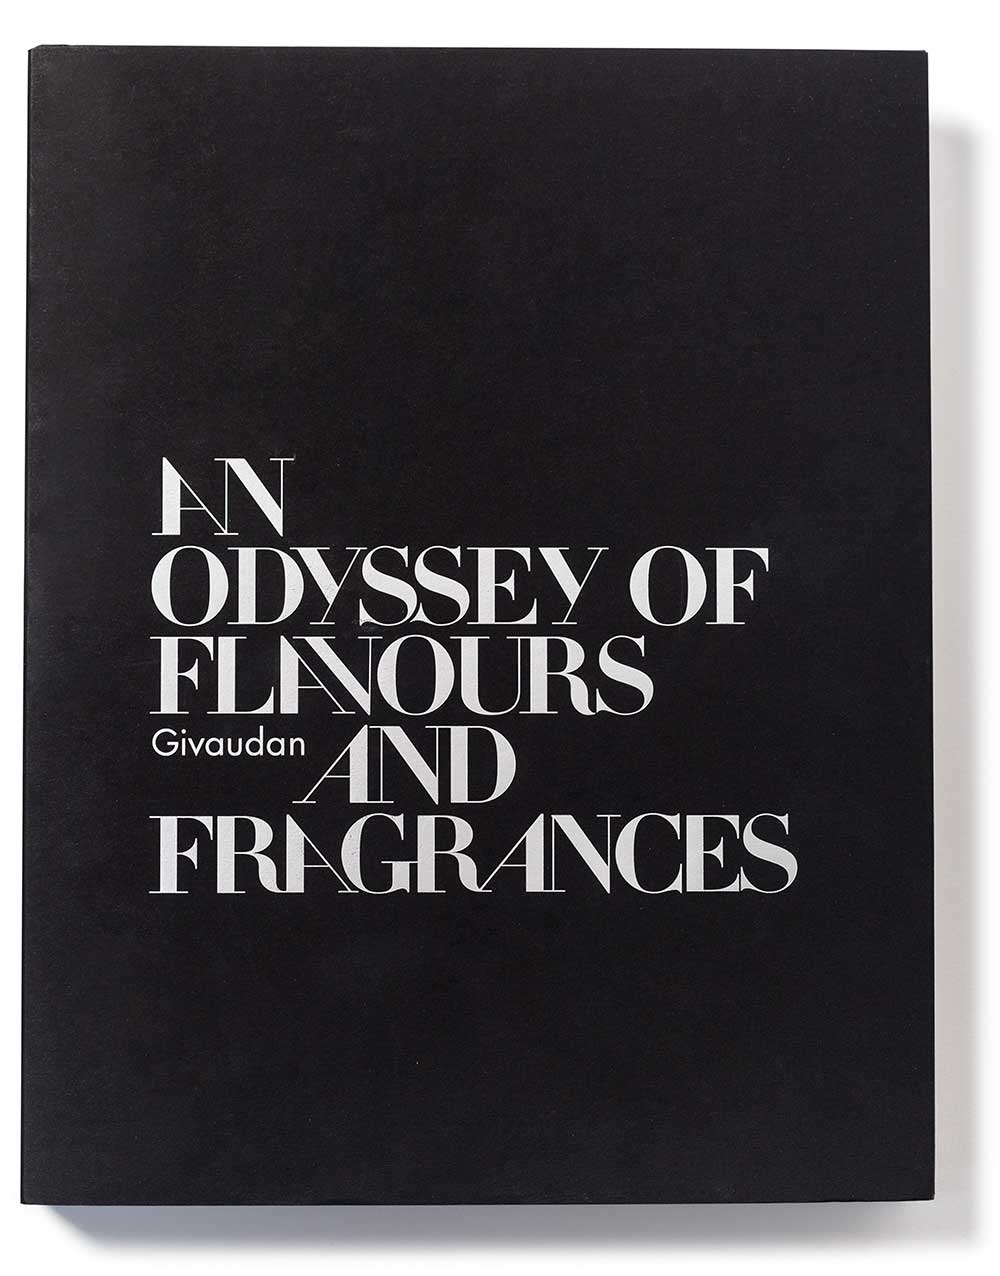 Givaudan: an Odyssey of Flavours and Fragrances – Caroline Champion, Percy Kemp, Annick Le Guérer, Brigitte Proust and Sean Rose